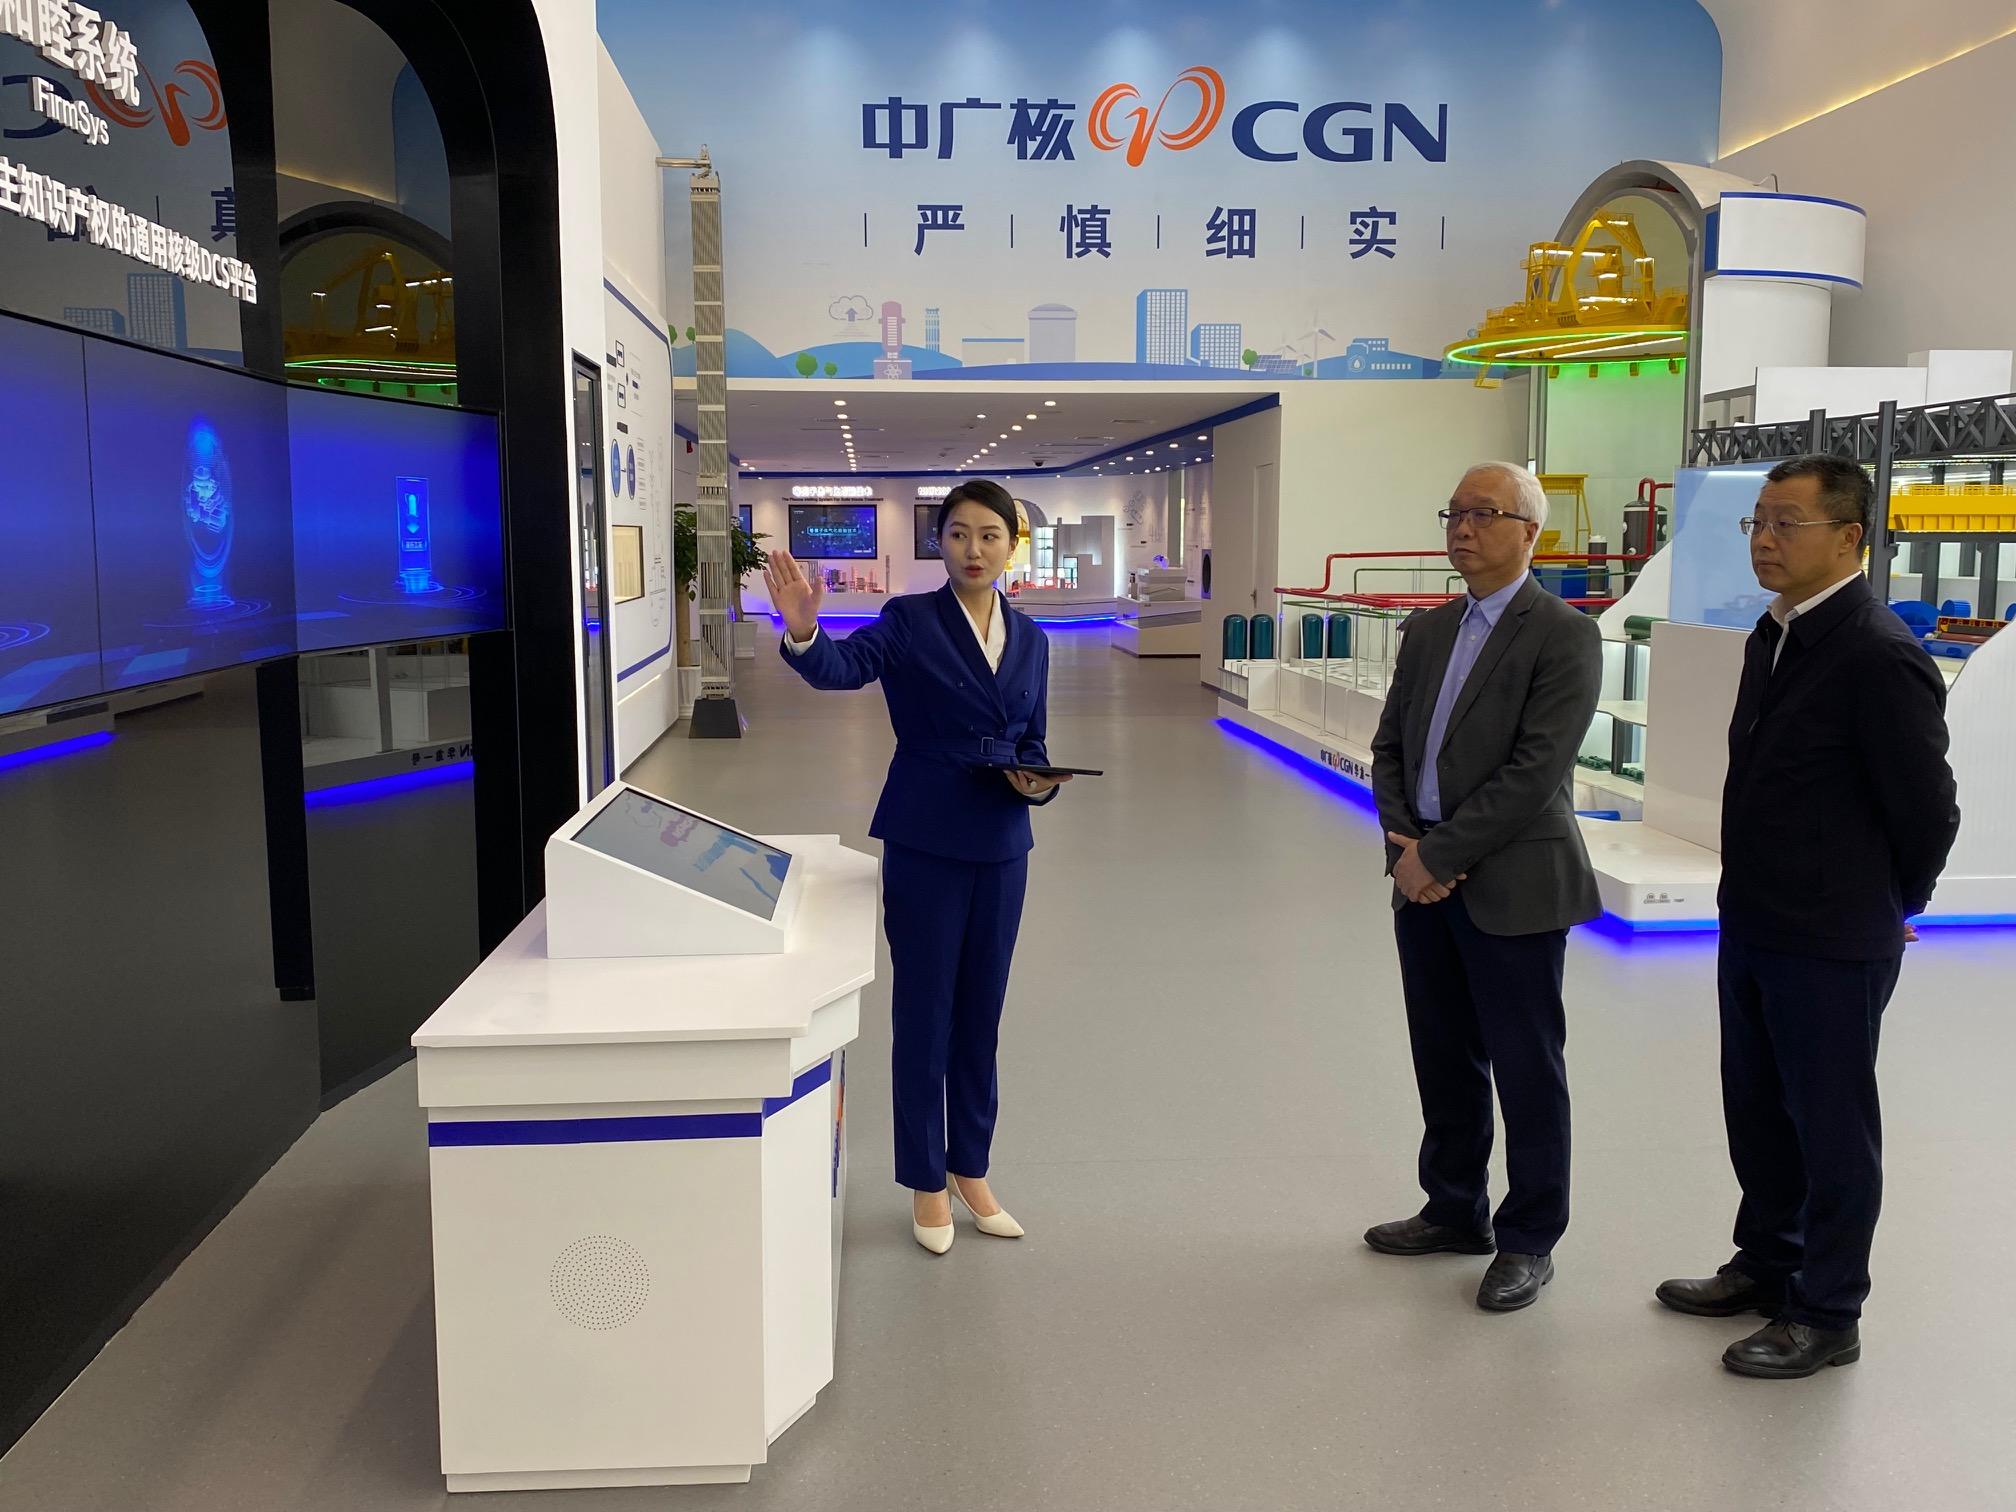 The Secretary for Environment and Ecology, Mr Tse Chin-wan, visited the China General Nuclear Power Corporation Limited (CGNPC) and the Daya Bay Nuclear Power Site in Shenzhen today (March 8). Photo shows Mr Tse (second right), accompanied by the President of the CGNPC, Mr Gao Ligang (first right), being briefed by a staff of the CGNPC to learn about the history and development of the company.